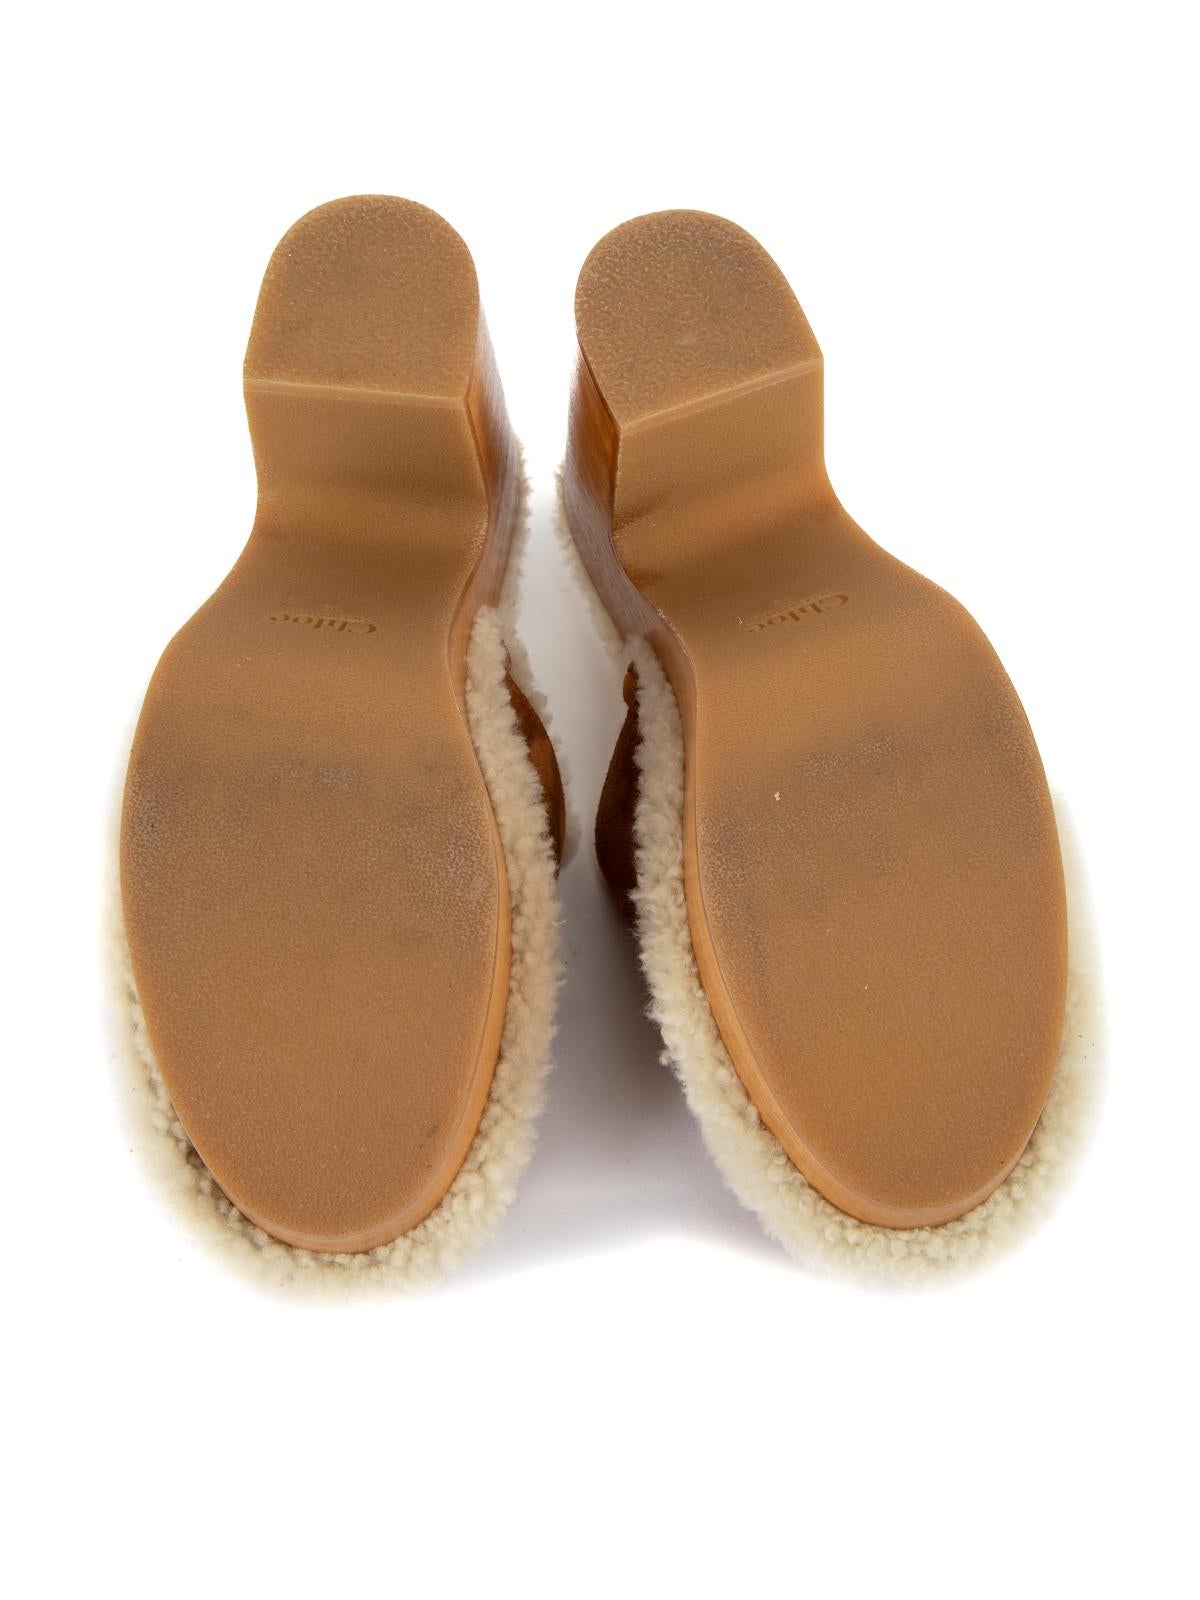 Pre-Loved Chloé Women's Brown Joy Shearling-Lined Suede Clogs 1